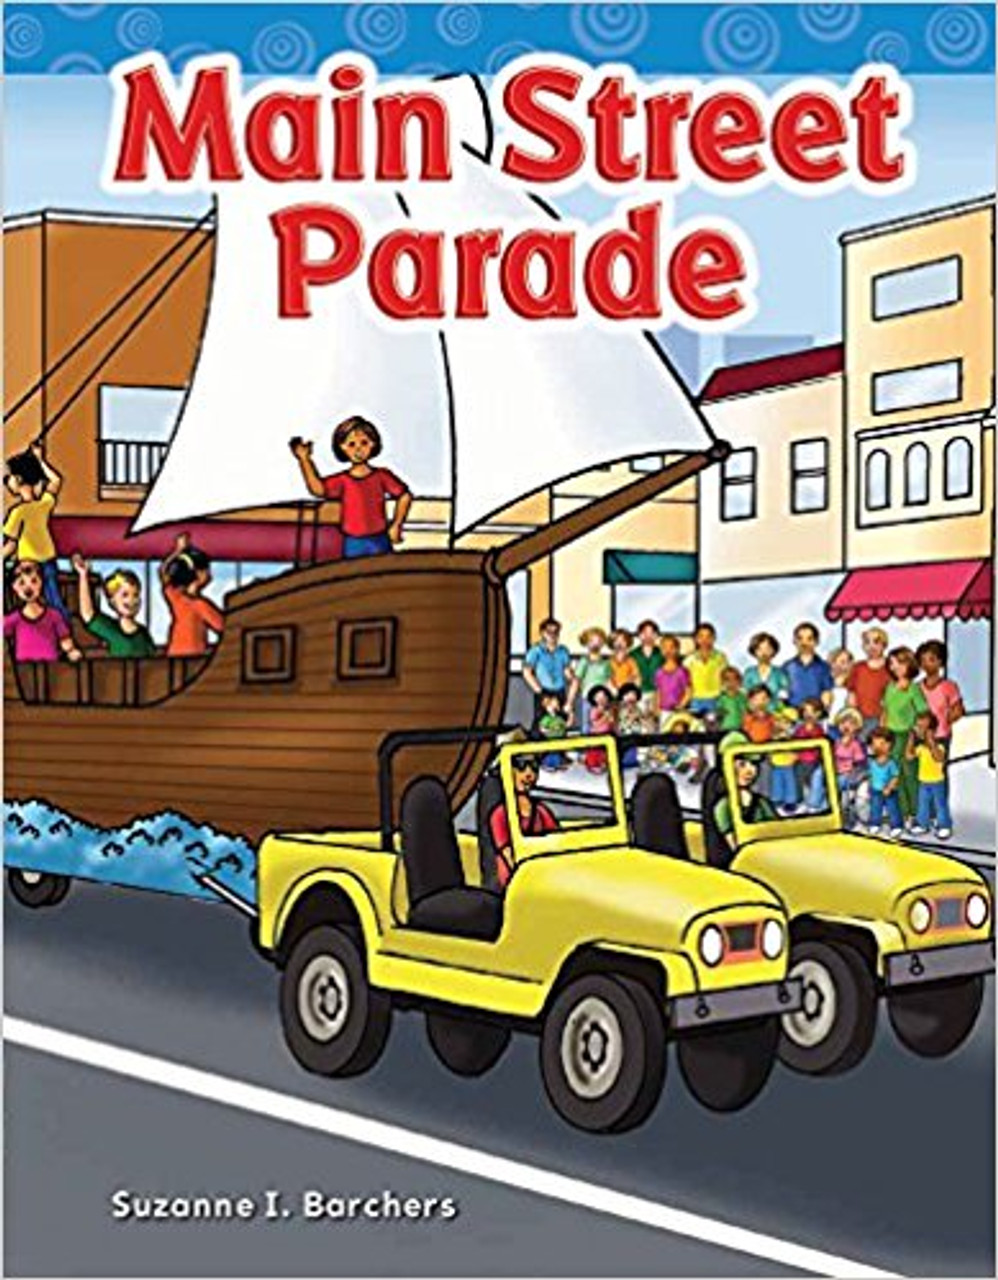 Main Street Parade by Suzanne Barchers